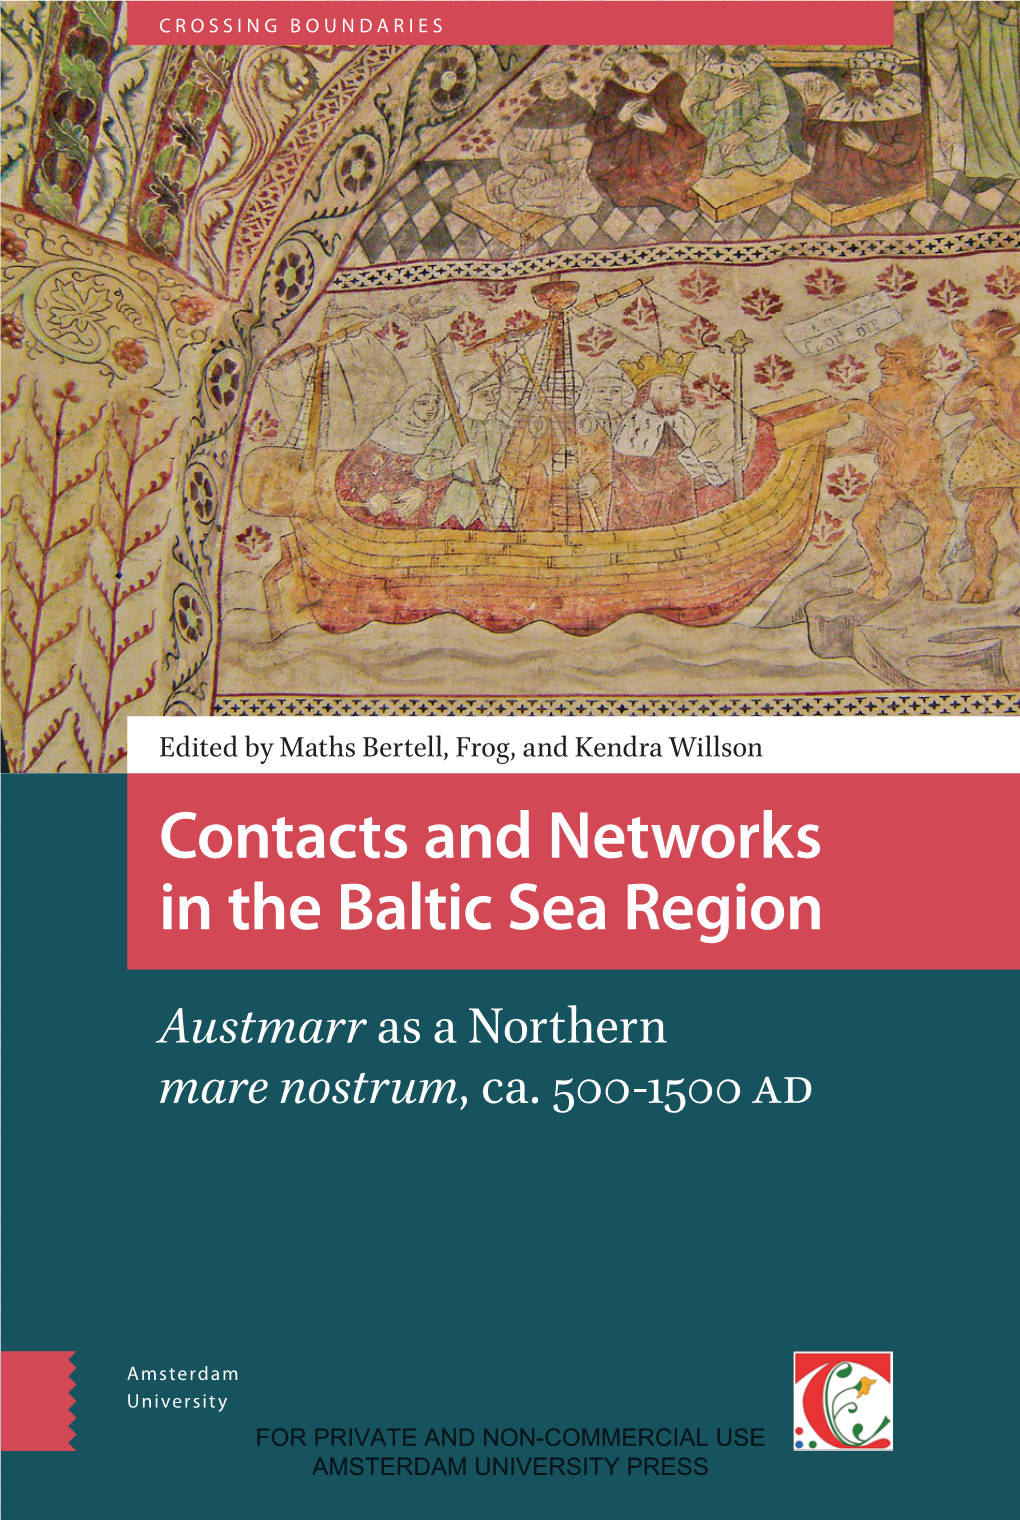 Contacts and Networks in the Baltic Sea Region